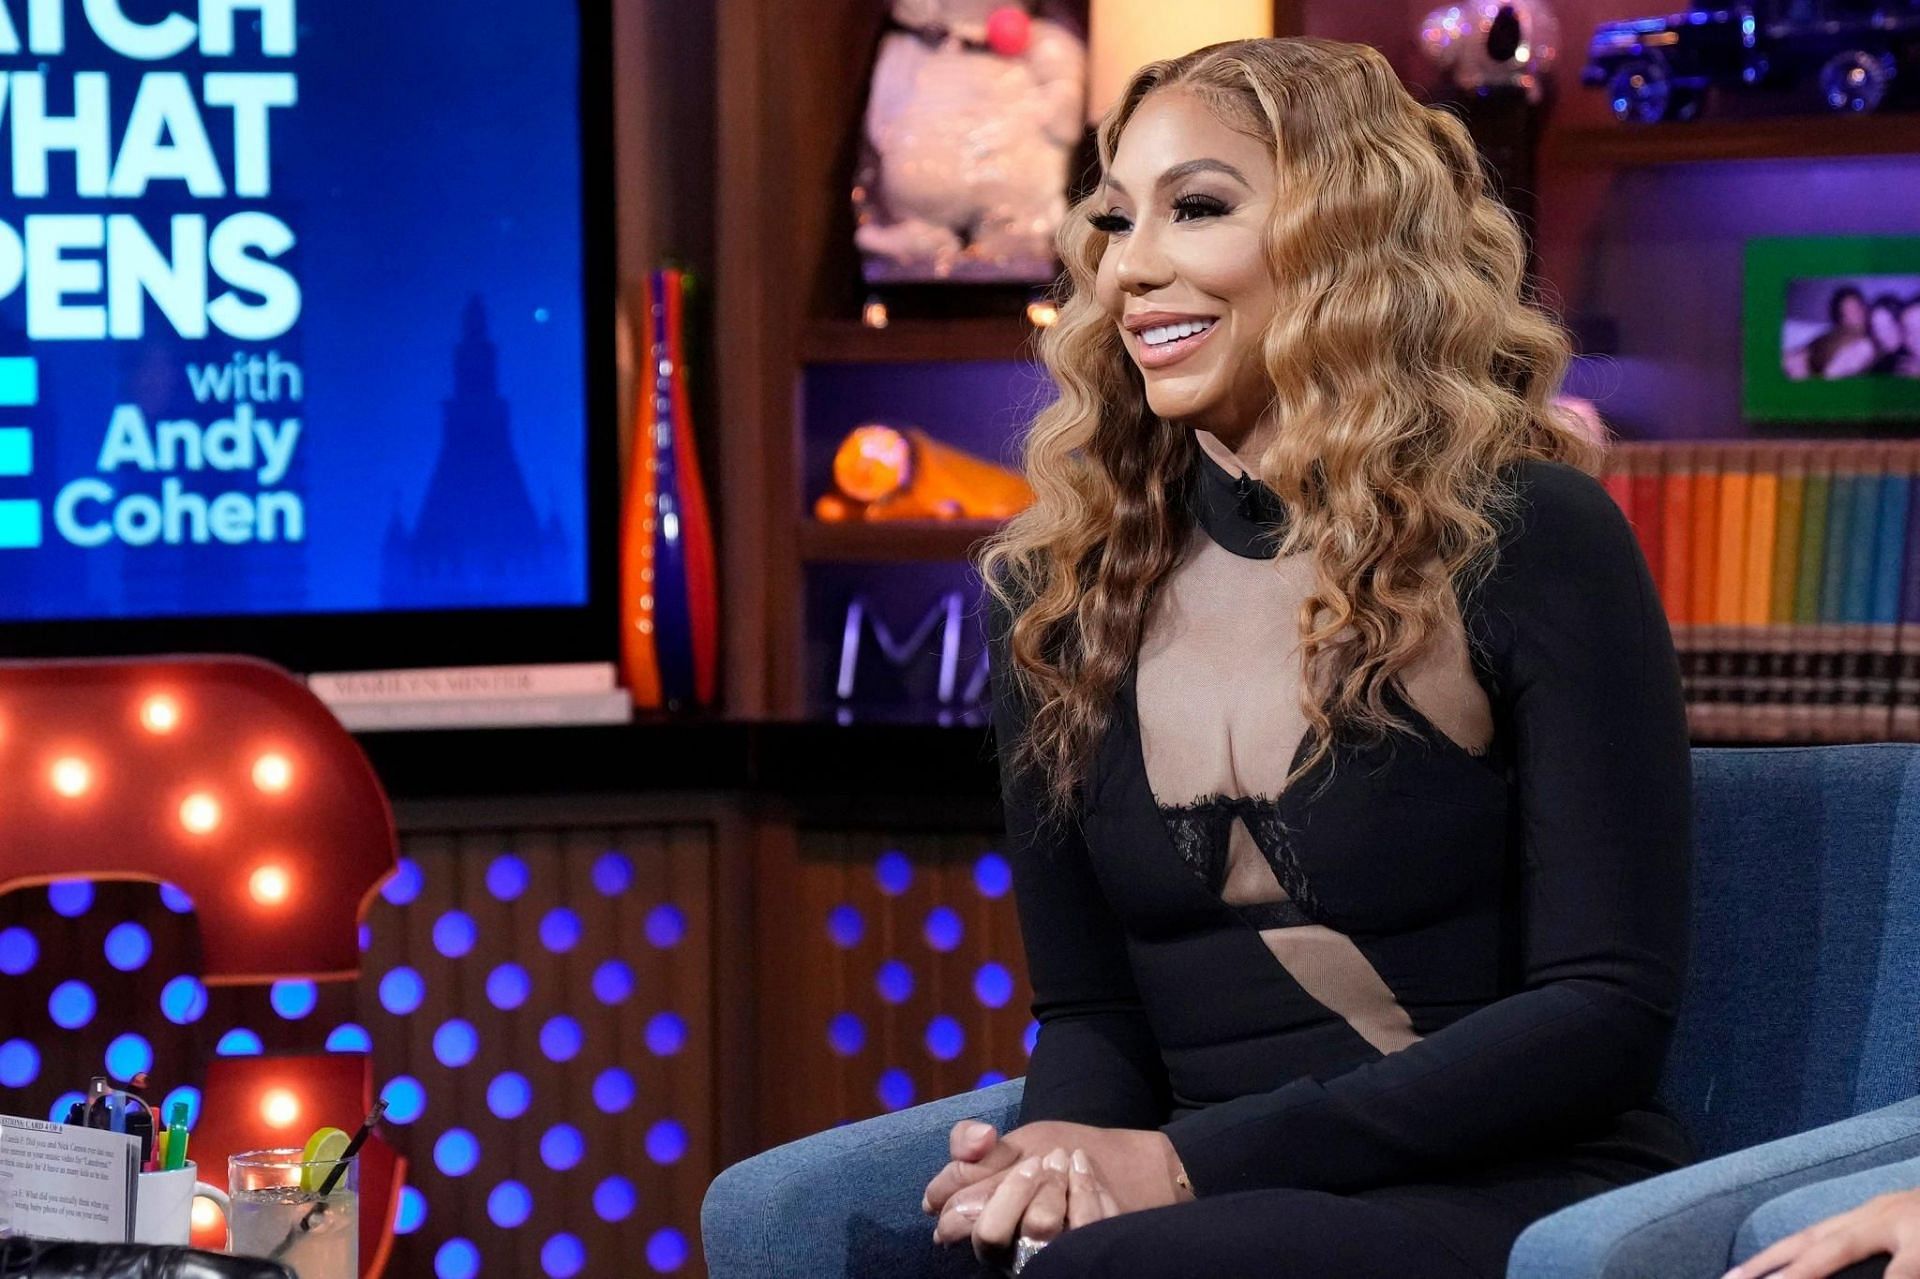 Tamar Braxton at What happens with Andy Cohen in March 2023 (Image via Getty Images)